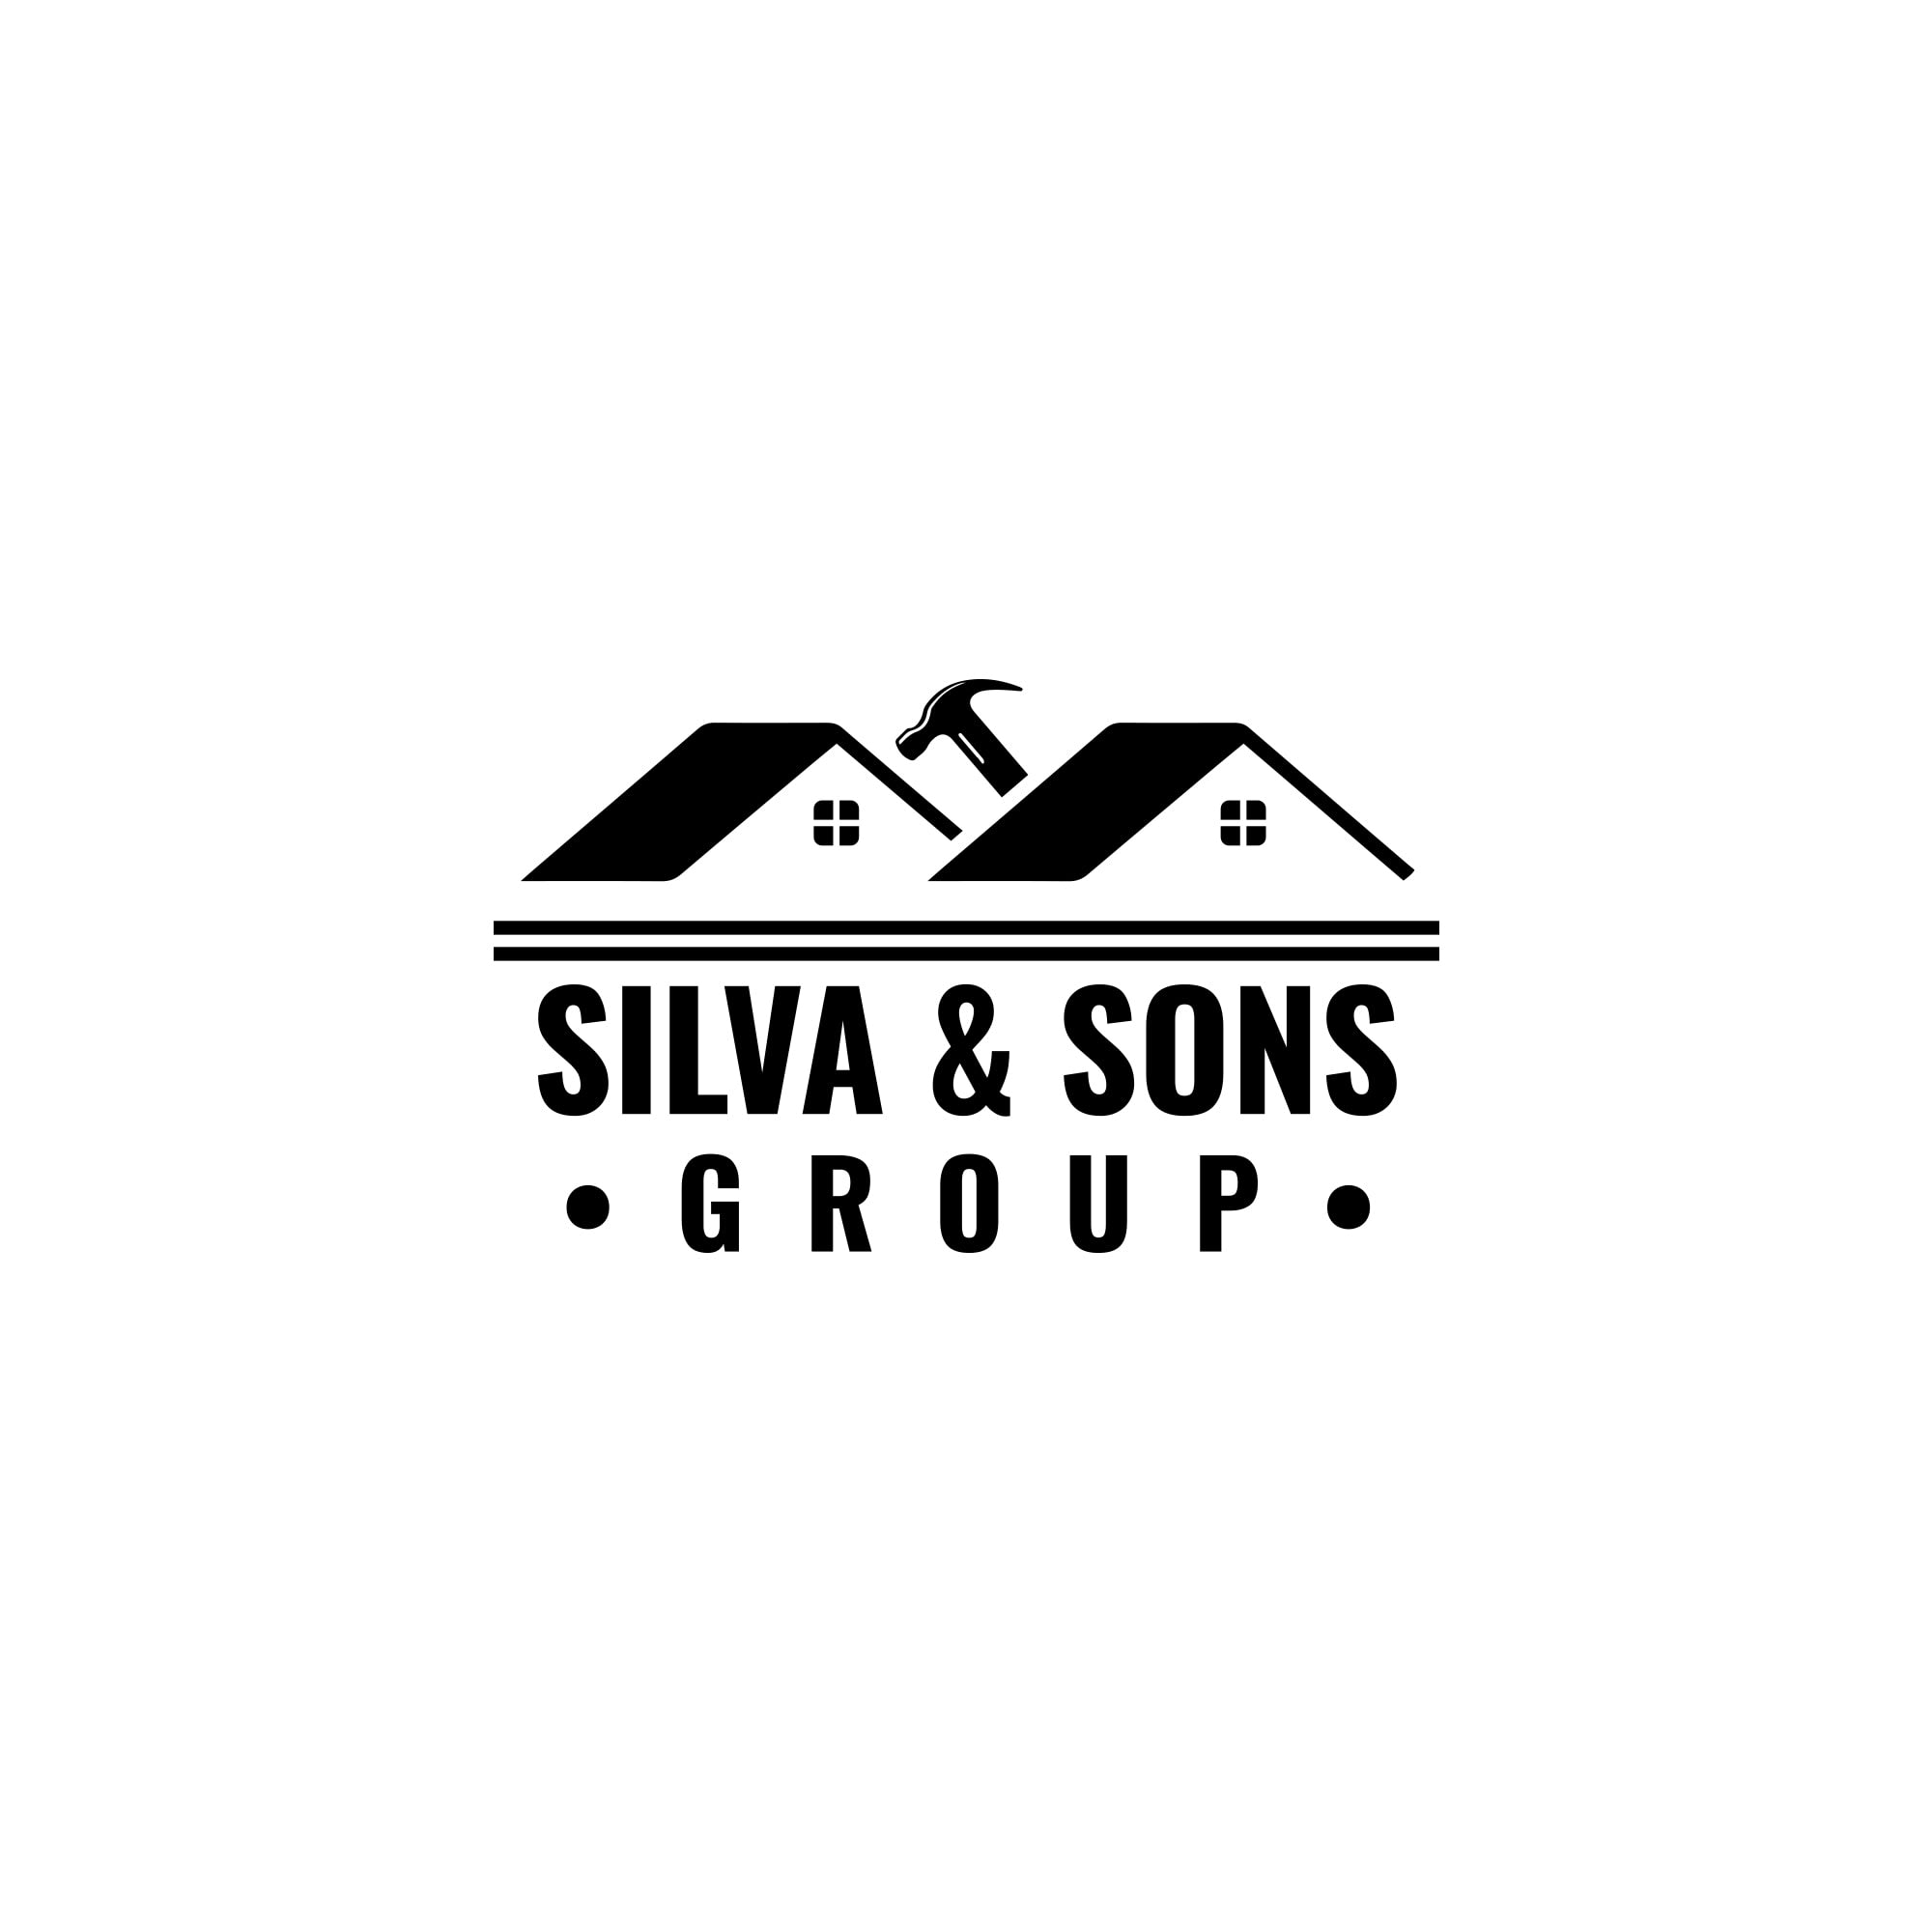 Silva & Sons Group Limited